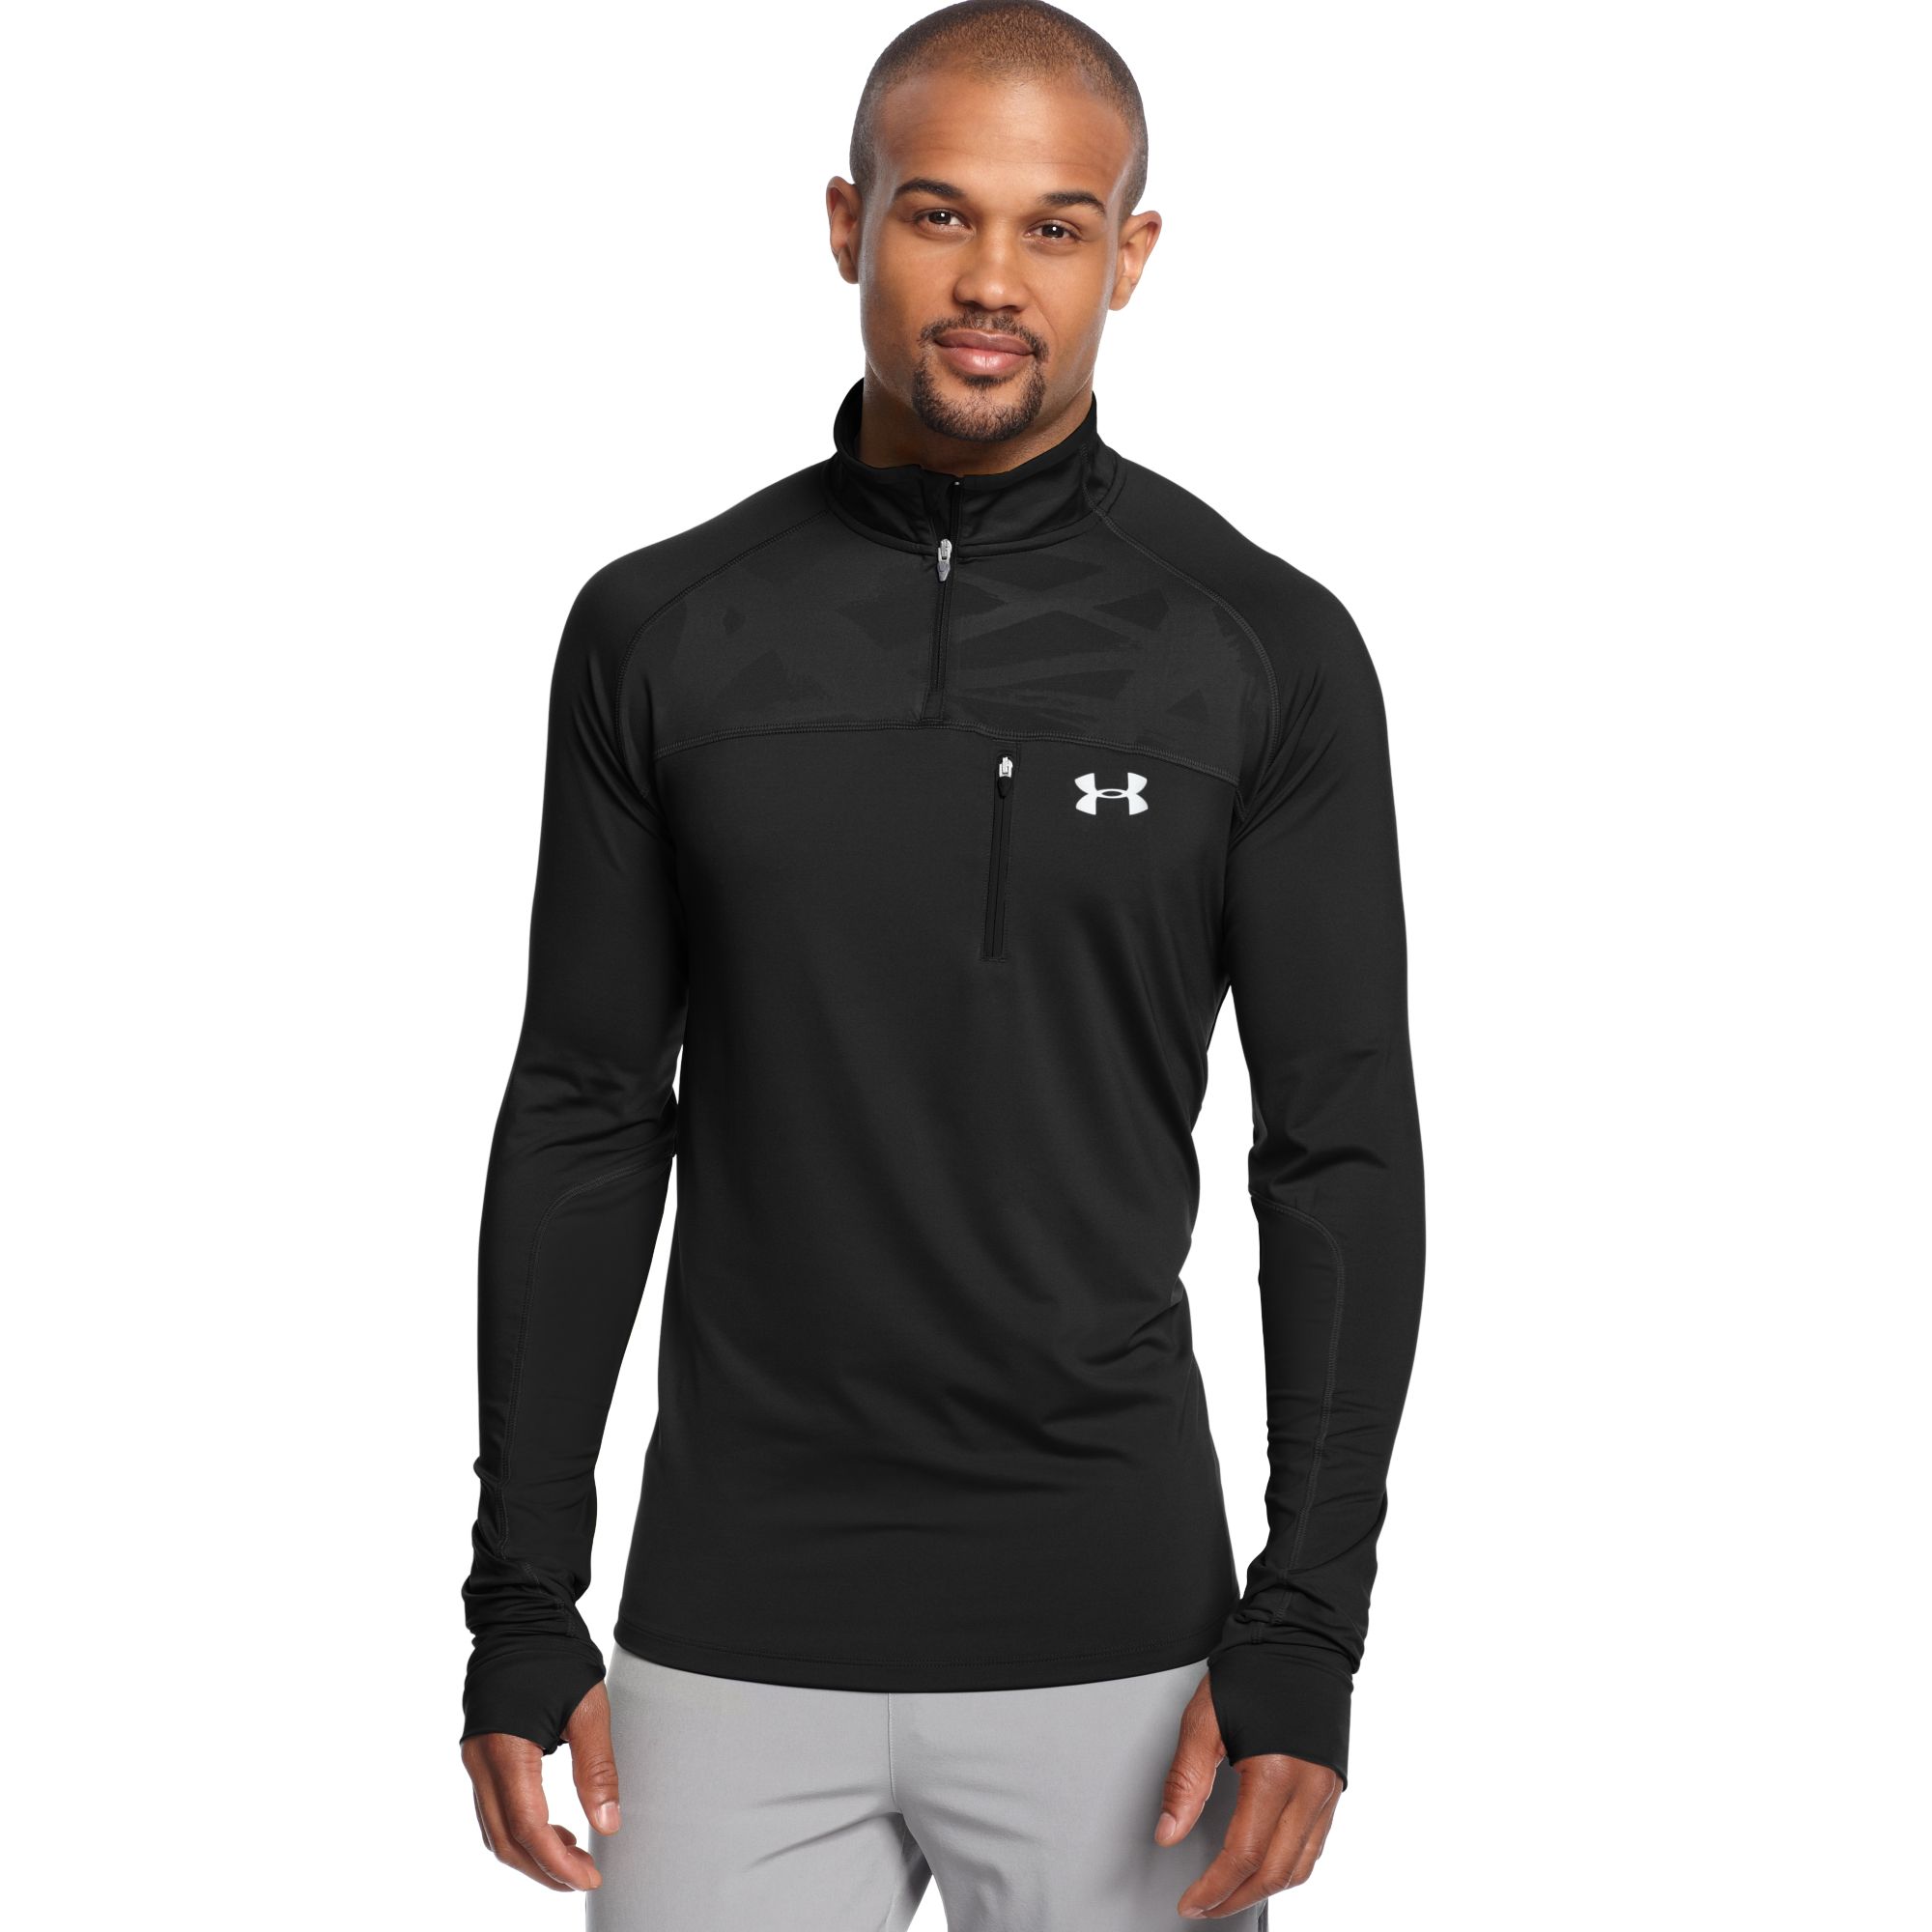 Lyst - Under armour Imminent Run Reflective Shirt in Gray for Men